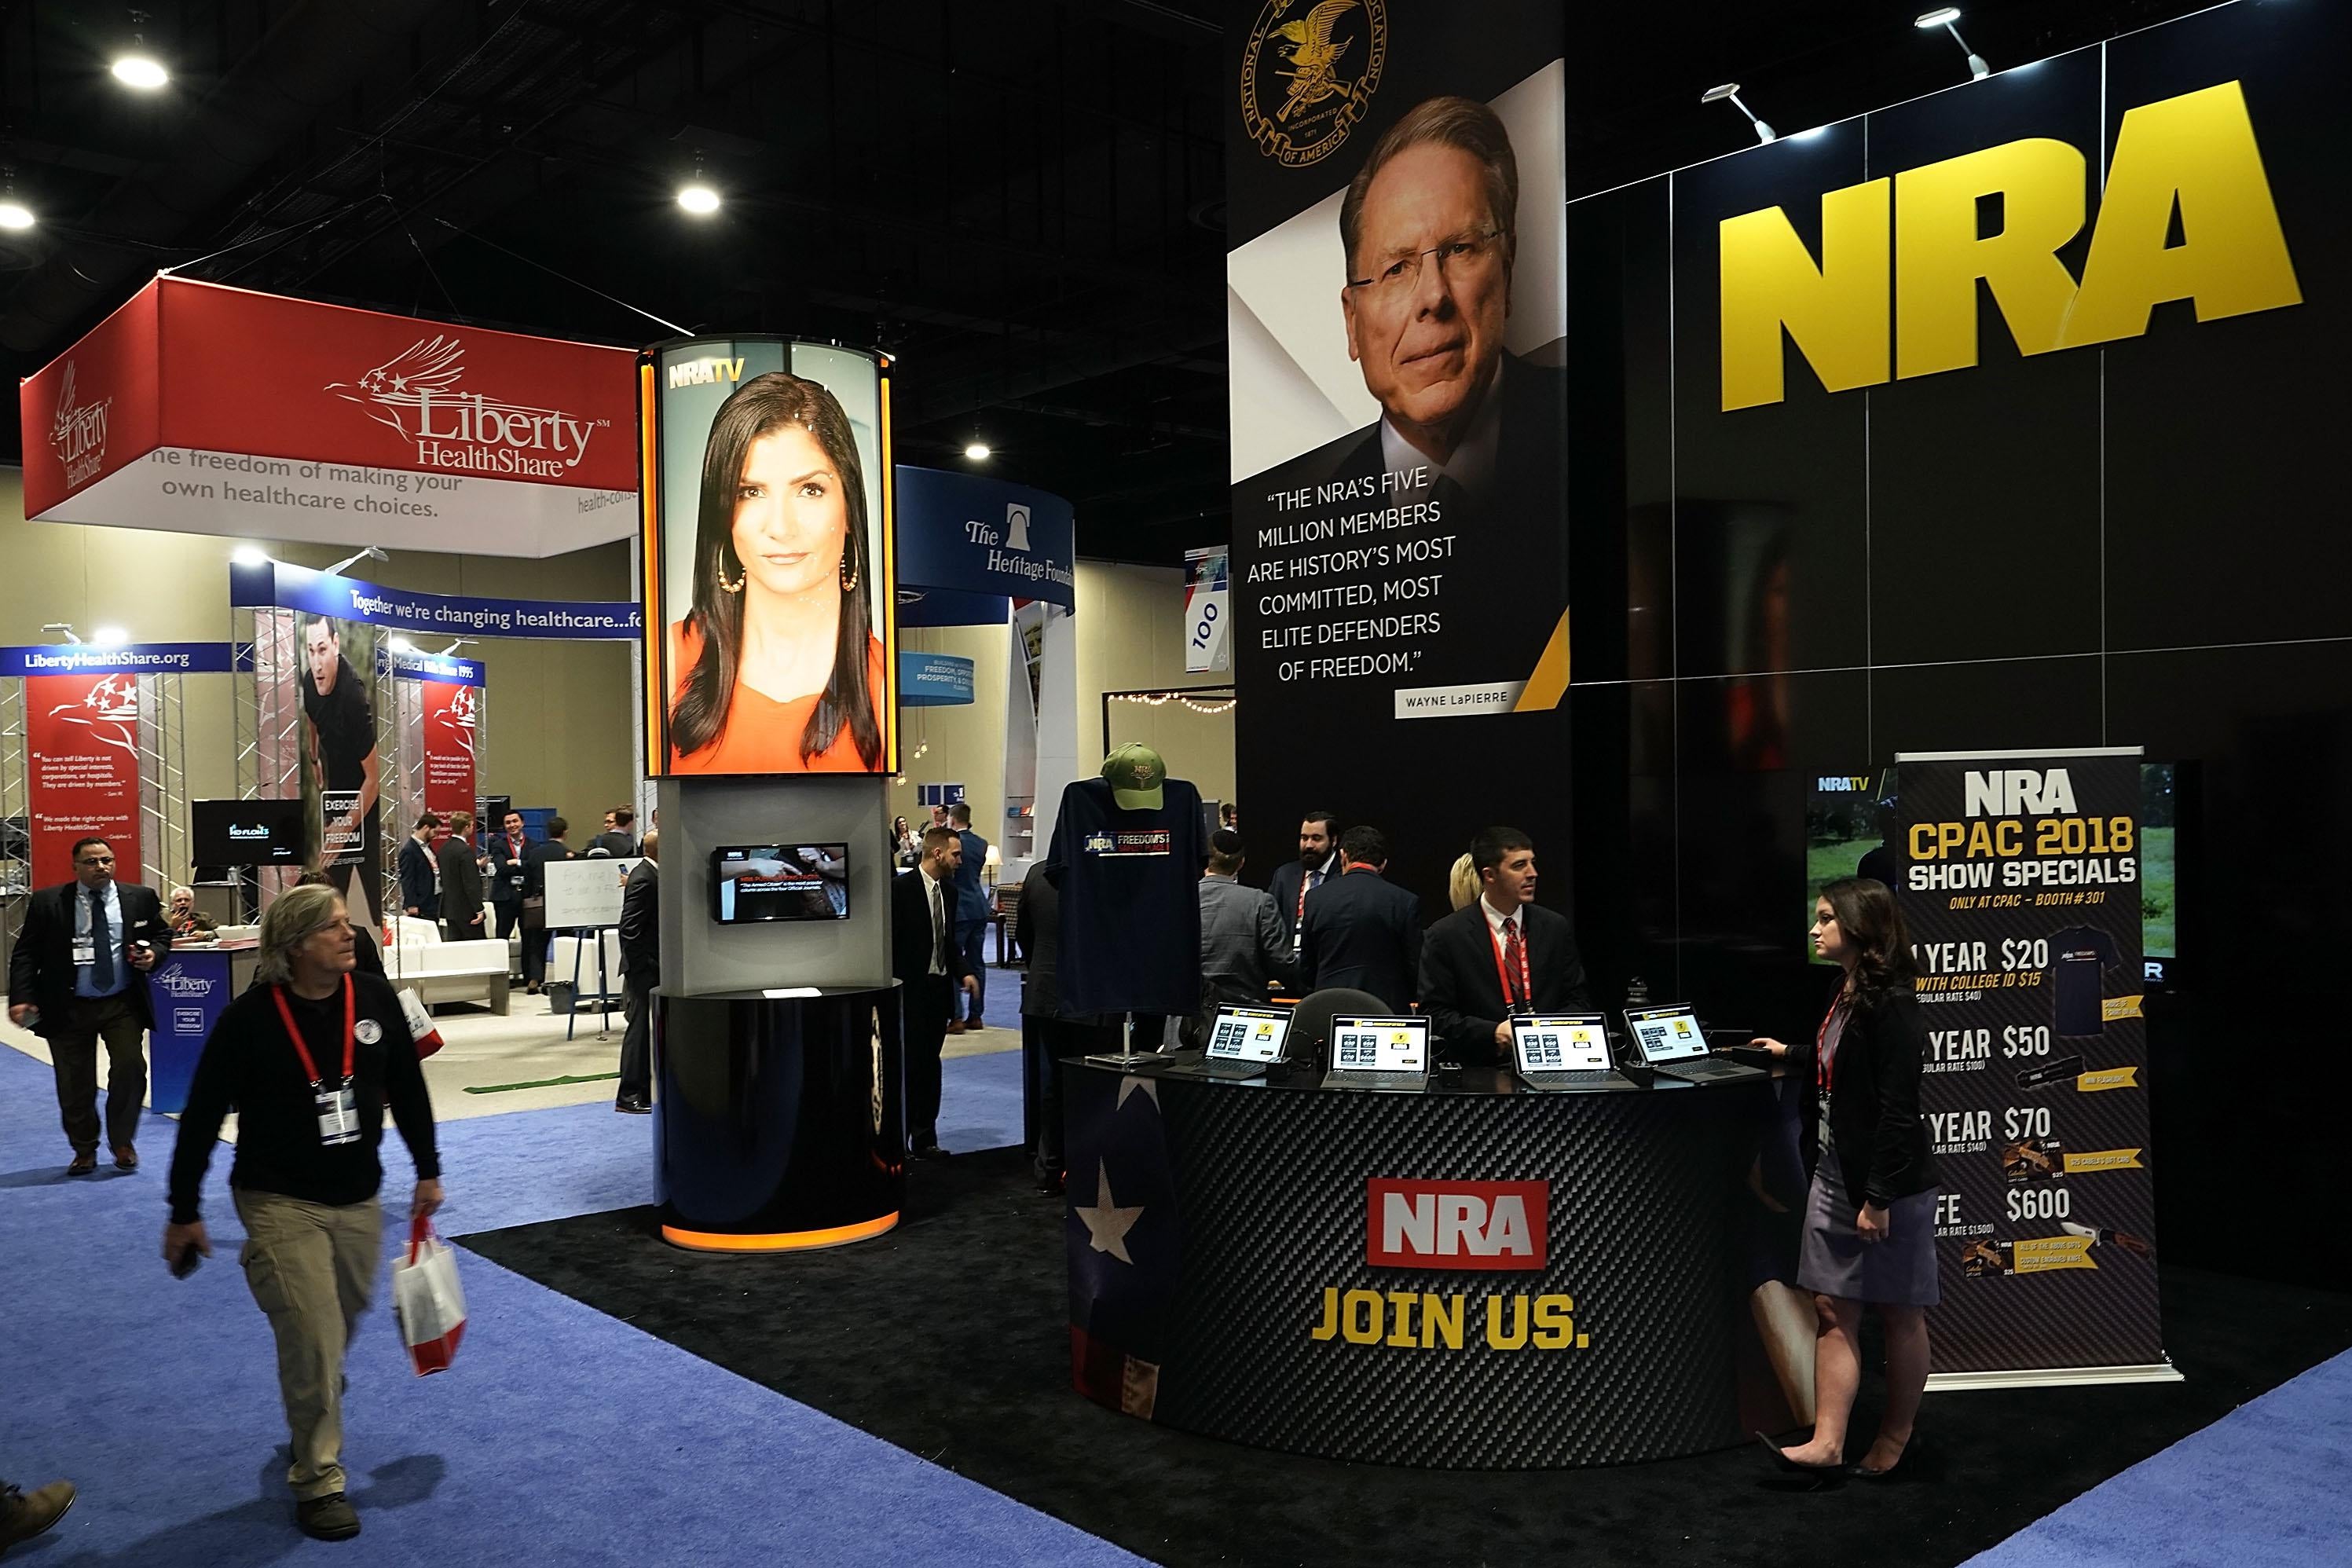 The booth of National Rifle Association (NRA) is seen during CPAC 2018 February 22, 2018.